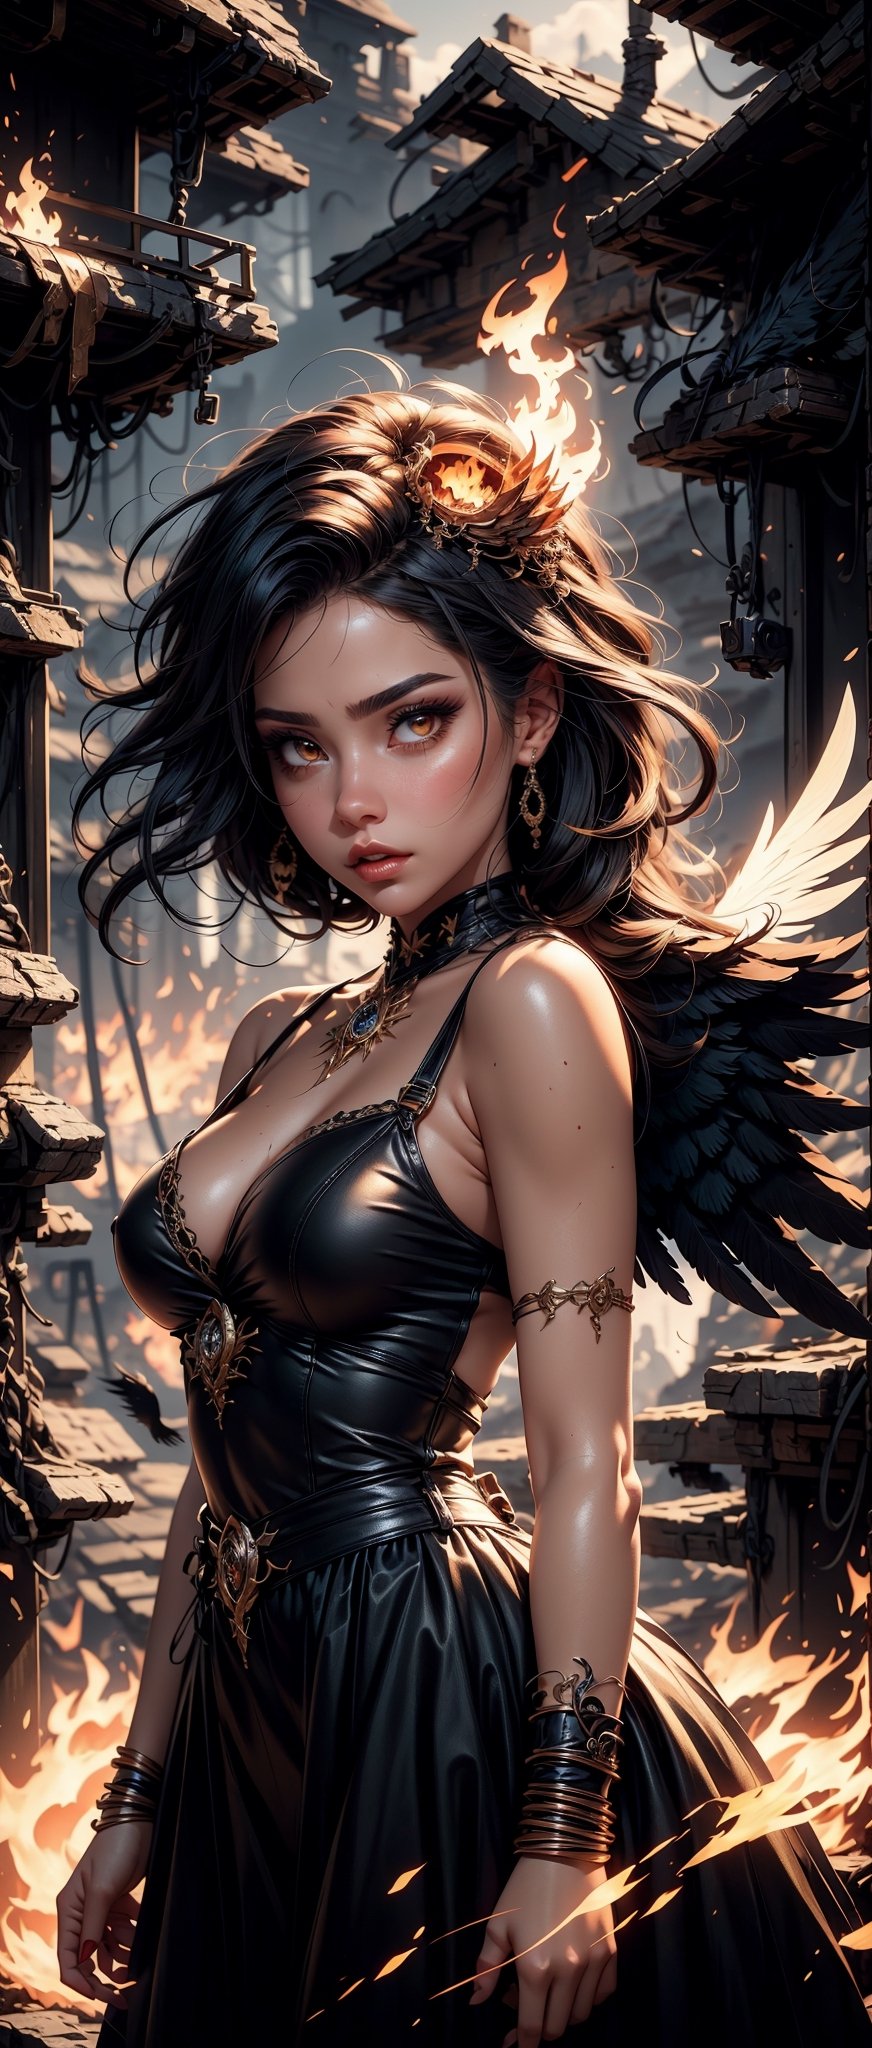 (1girl), (fantasy style:1.2), (high quality:1.3), (best quality:1.3), (masterpiece:1.3), official art, official wallpaper, 4k textures, epic(1.5), (phoenix woman), blackphoenix, black hair, (detailedfeathers), (fierywings), aggressivepose, midflight, (detailedplumage), glowingeffects, darkbackground, fire, flames, dramaticlighting, fireandicecontrast, (detailed:1.05), (extremely detailed:1.06), sharp focus, (intricate:1.03), (extremely intricate:1.04), (epic scenery:1.09), soothing tones, hdr, (beautiful scenery:1.08), (detailed scenery:1.08), (intricate scenery:1.07), (wonderful scenery:1.05), (beautiful face:1.1), (perfect eyes:0.8), (perfect skin:0.8), (detailed face:0.8), (detailed eyes:0.8), (detailed hair:0.9), (detailed lips:0.8),Sexy Women ,dress